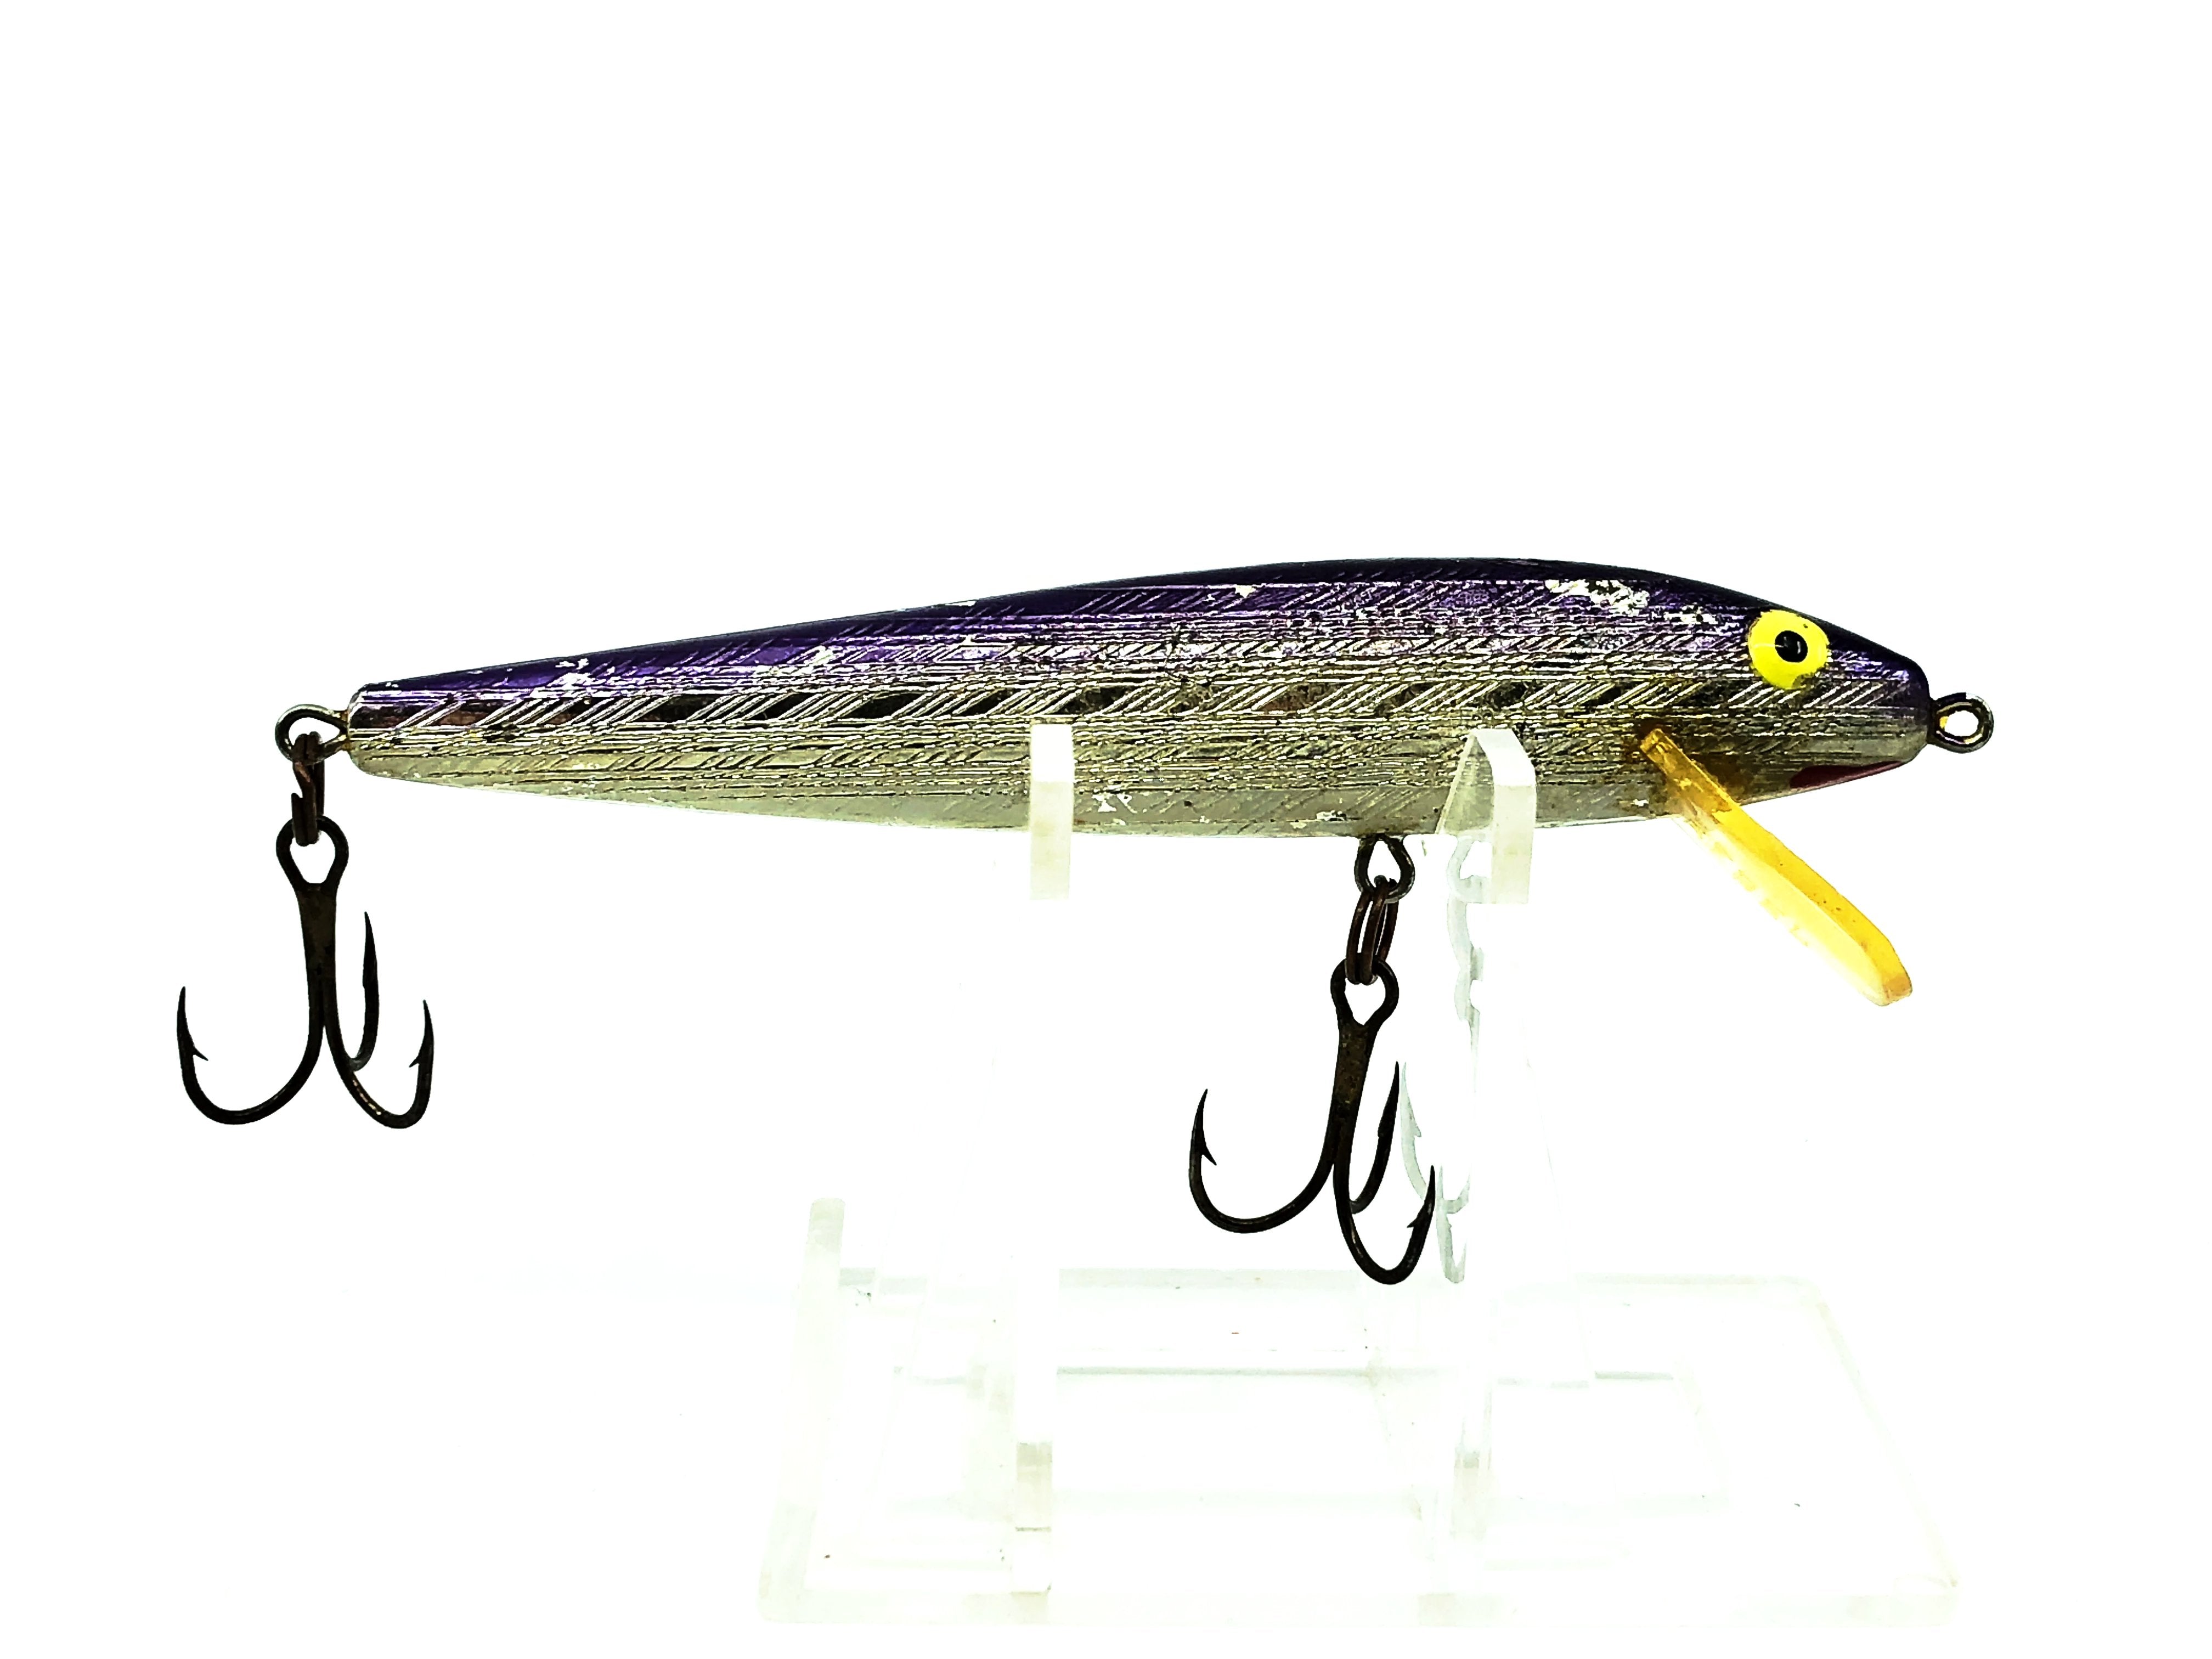 Rebel Floating Minnow F10, #05 Silver/Purple Back Color – My Bait